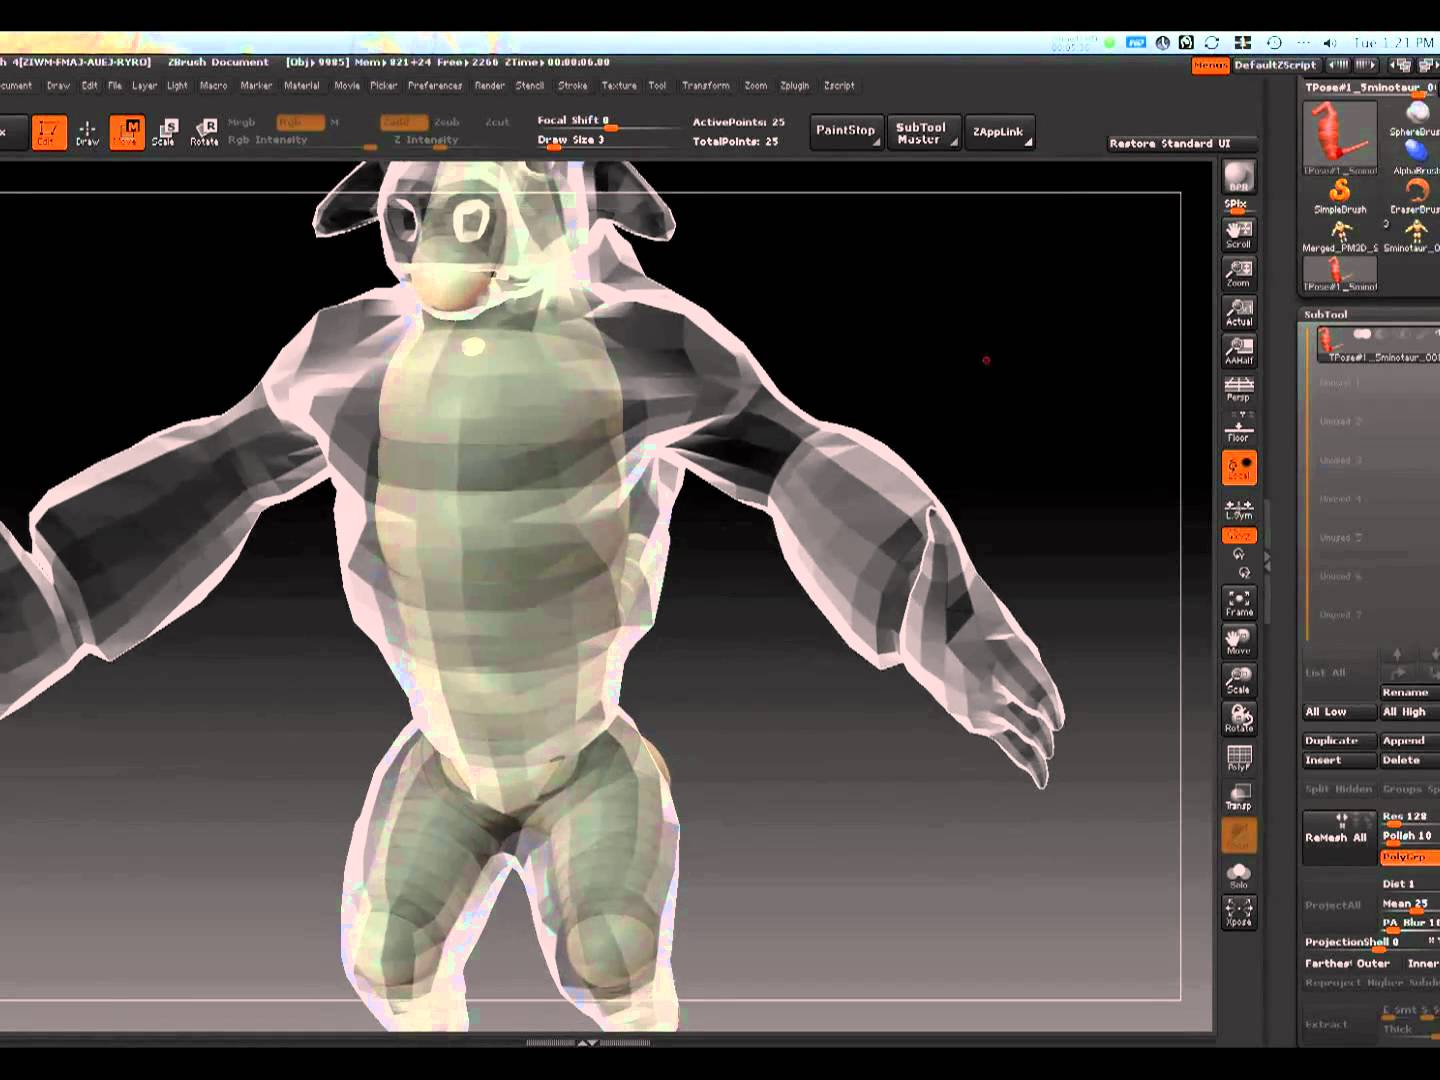 Posing Characters in Zbrush using a Zsphere Rig - 3DM3.com.